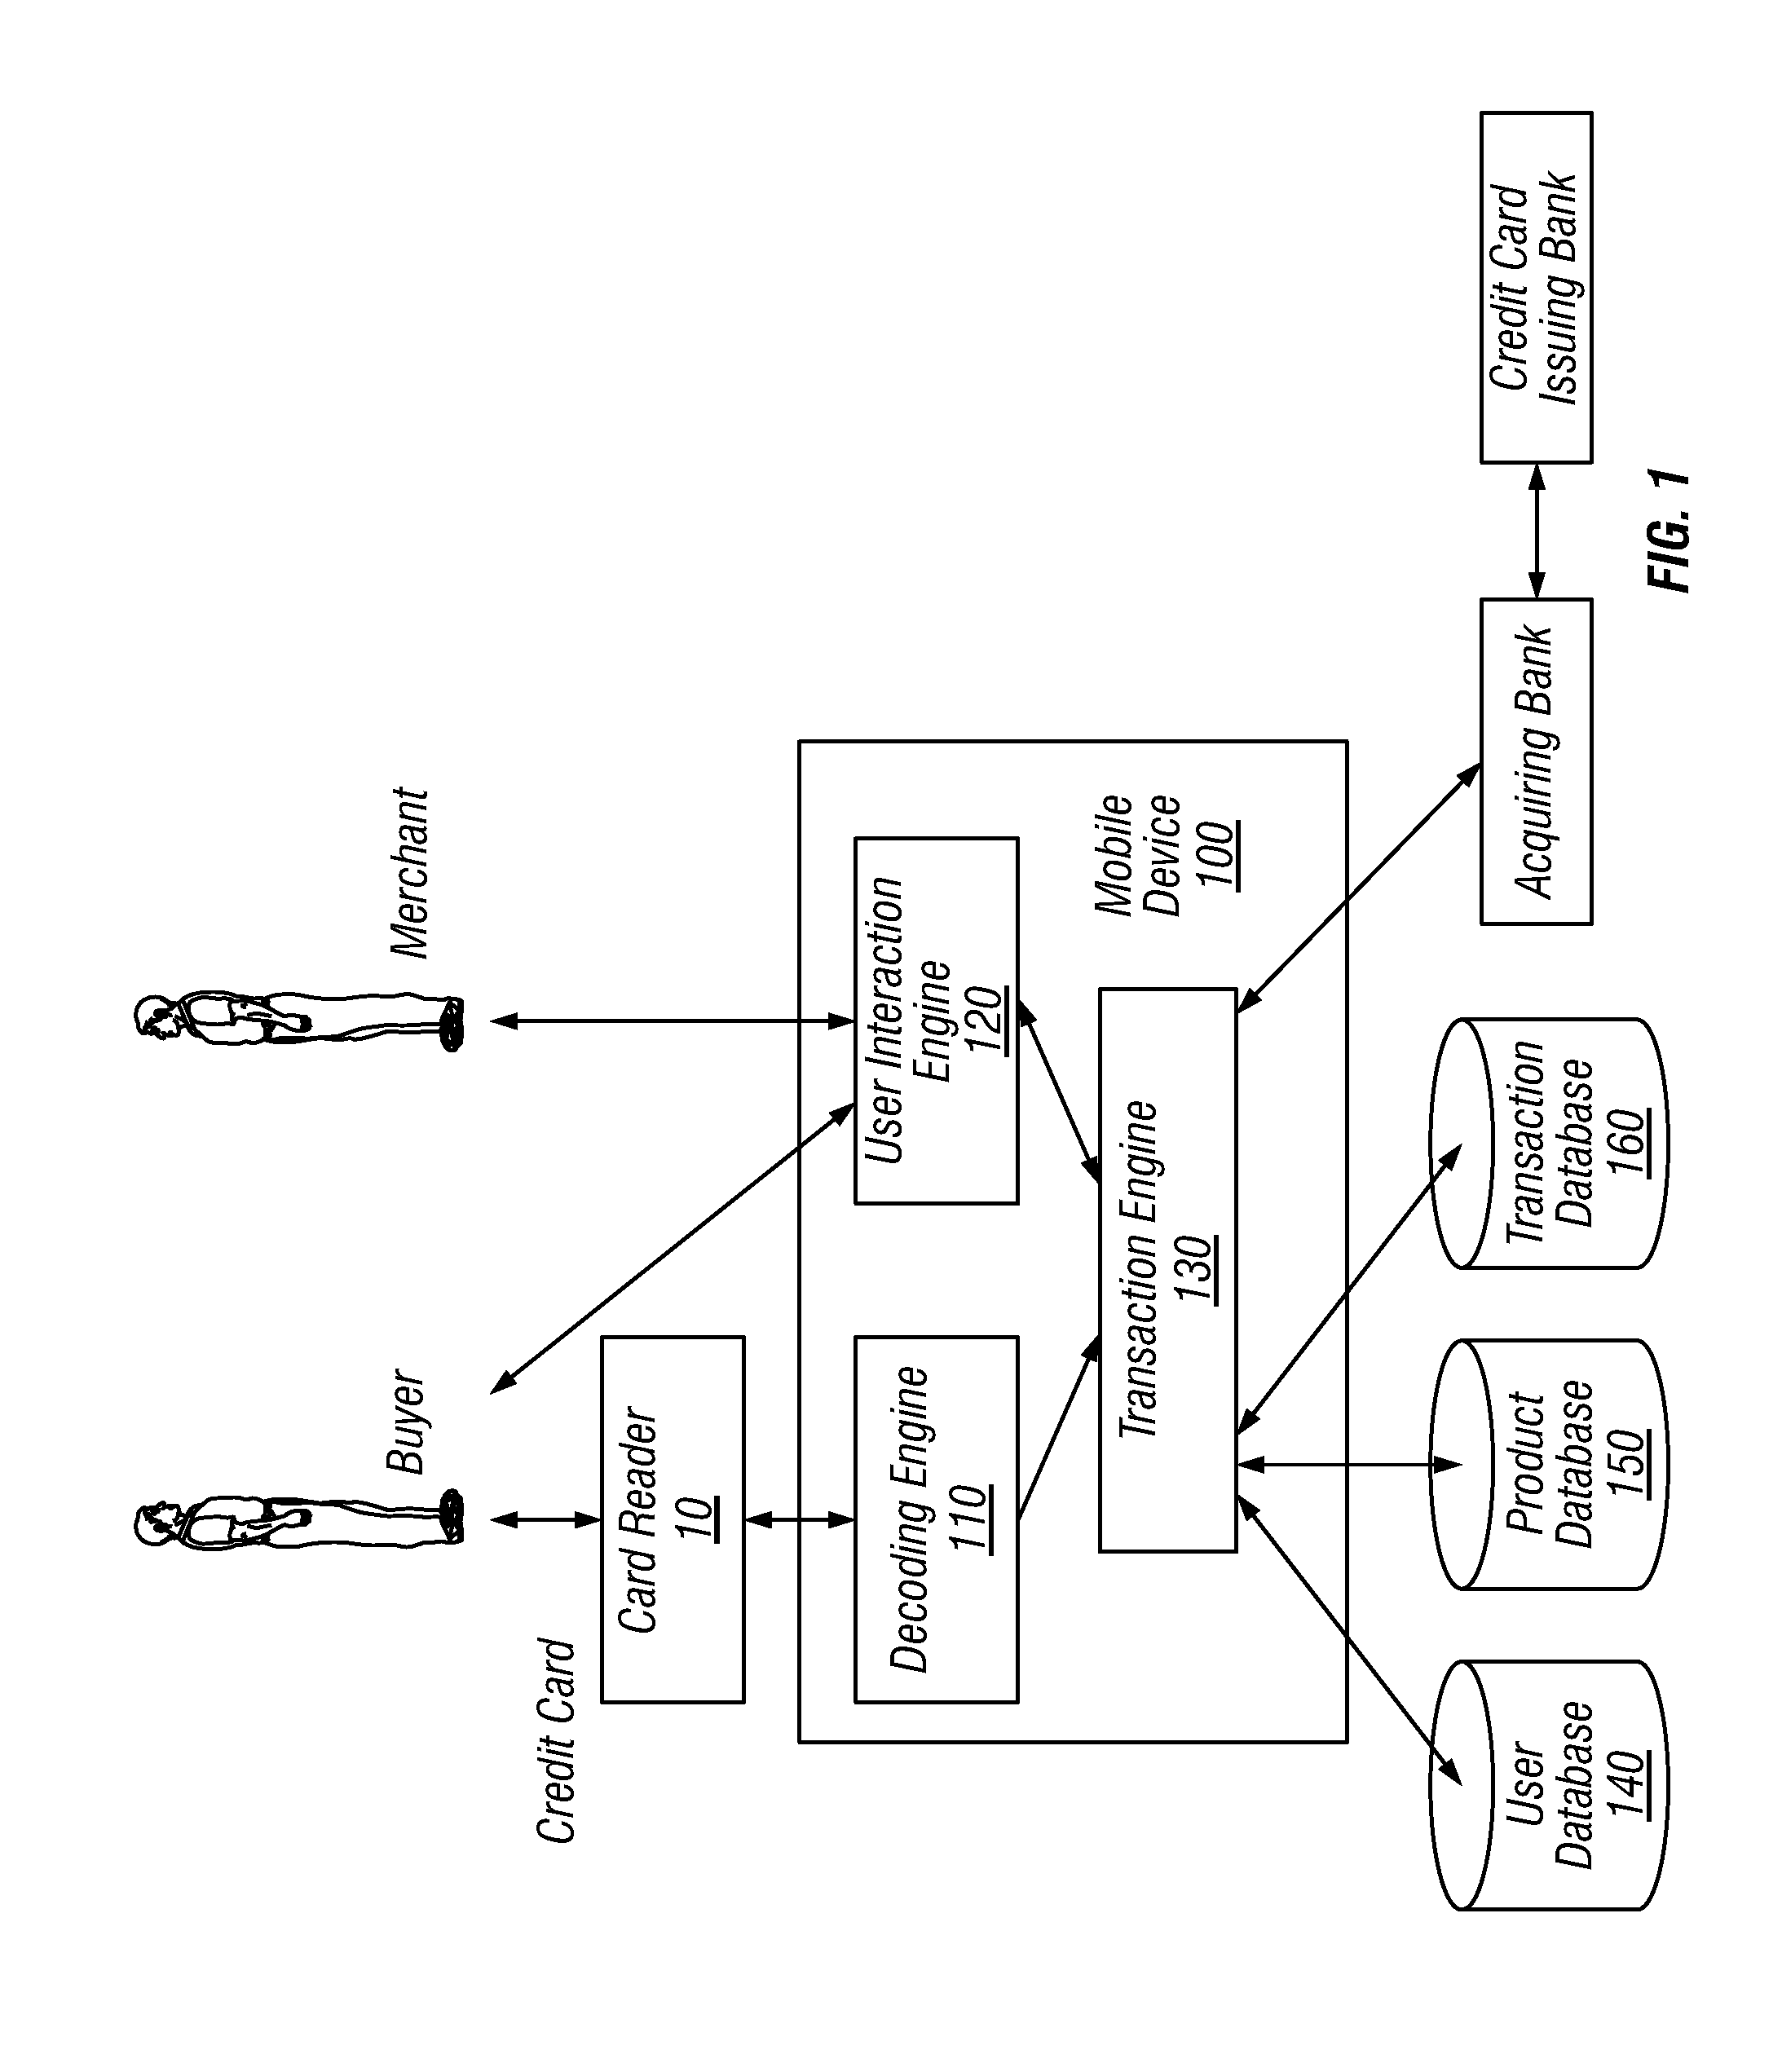 Method for conducting financial transactions